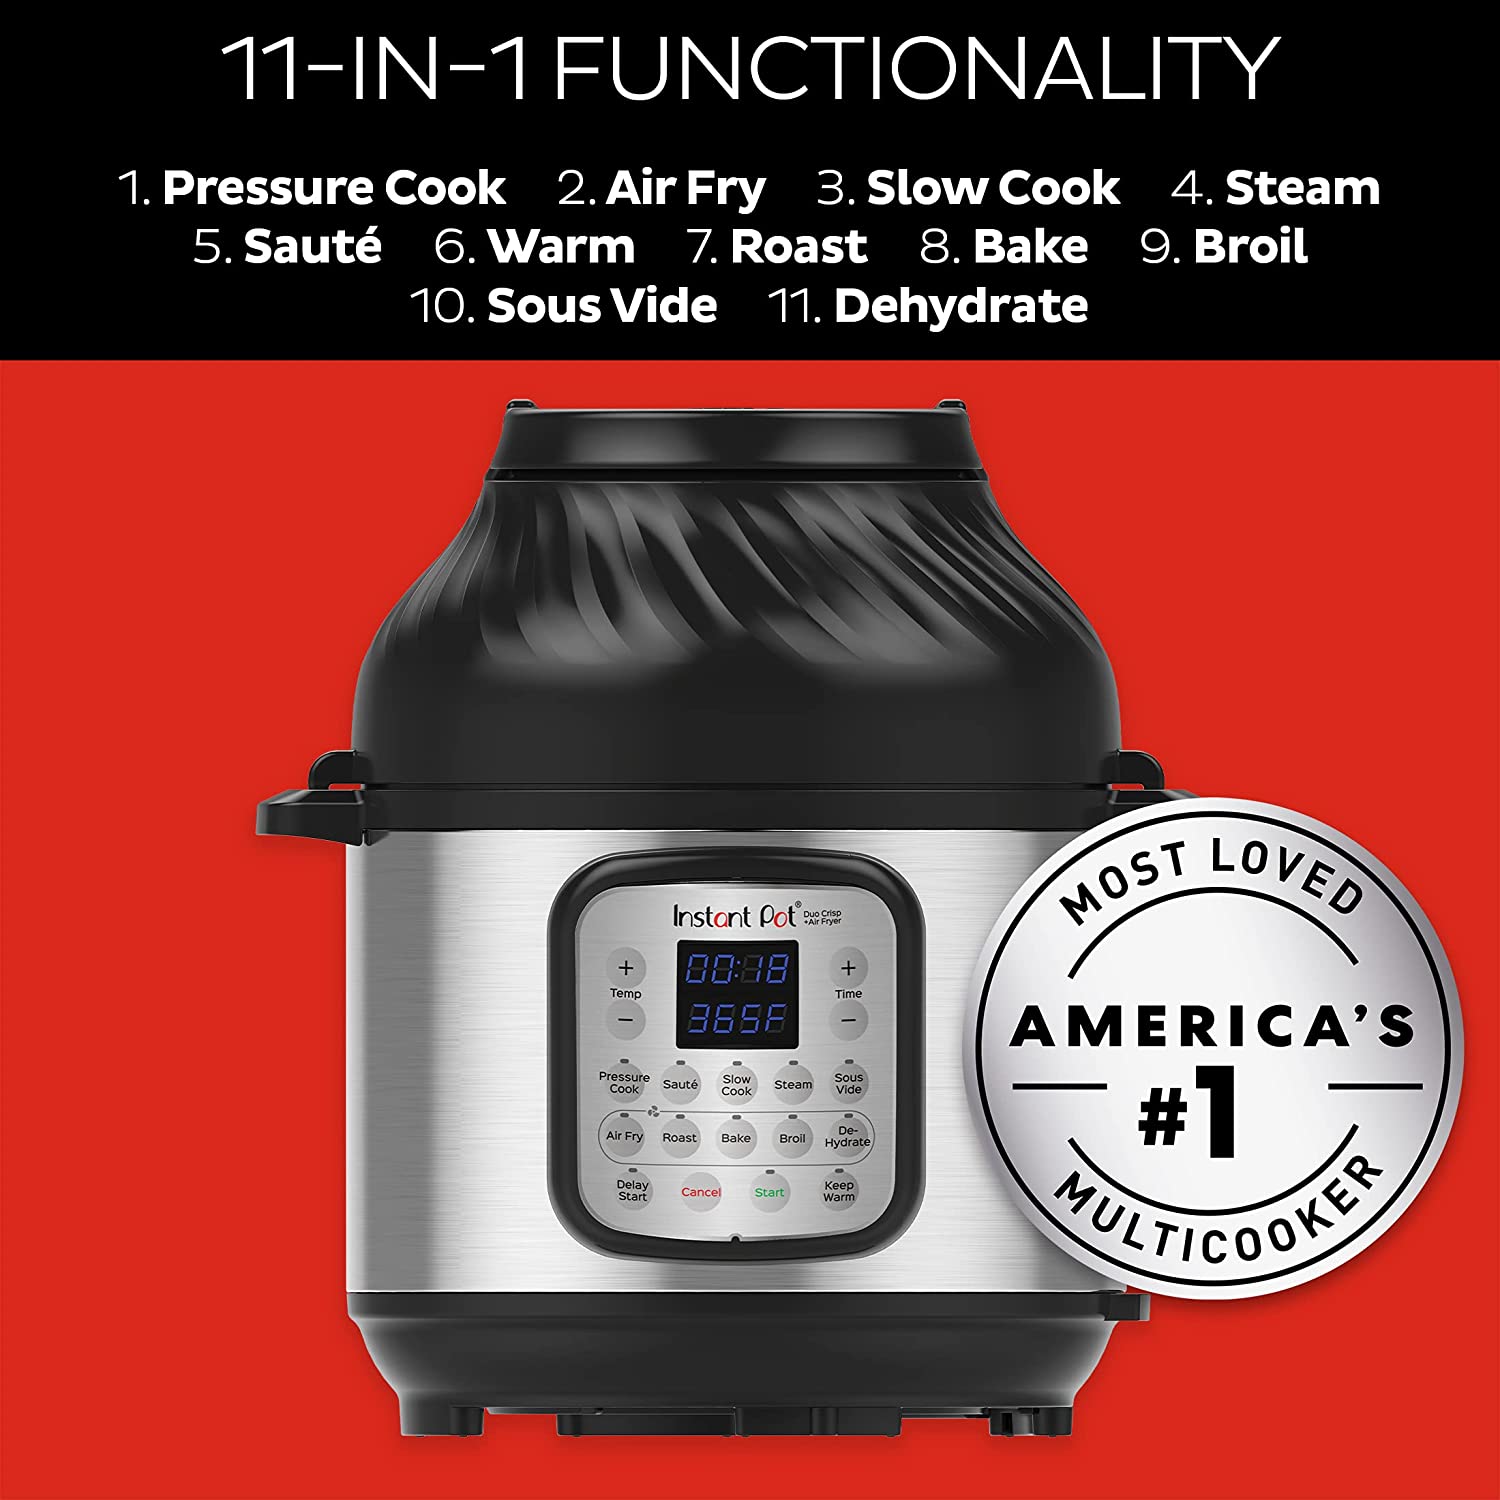 Instant Pot Duo Crisp 11-in-1 Electric Pressure Cooker with Air Fryer Lid - Black/Stainless Steel